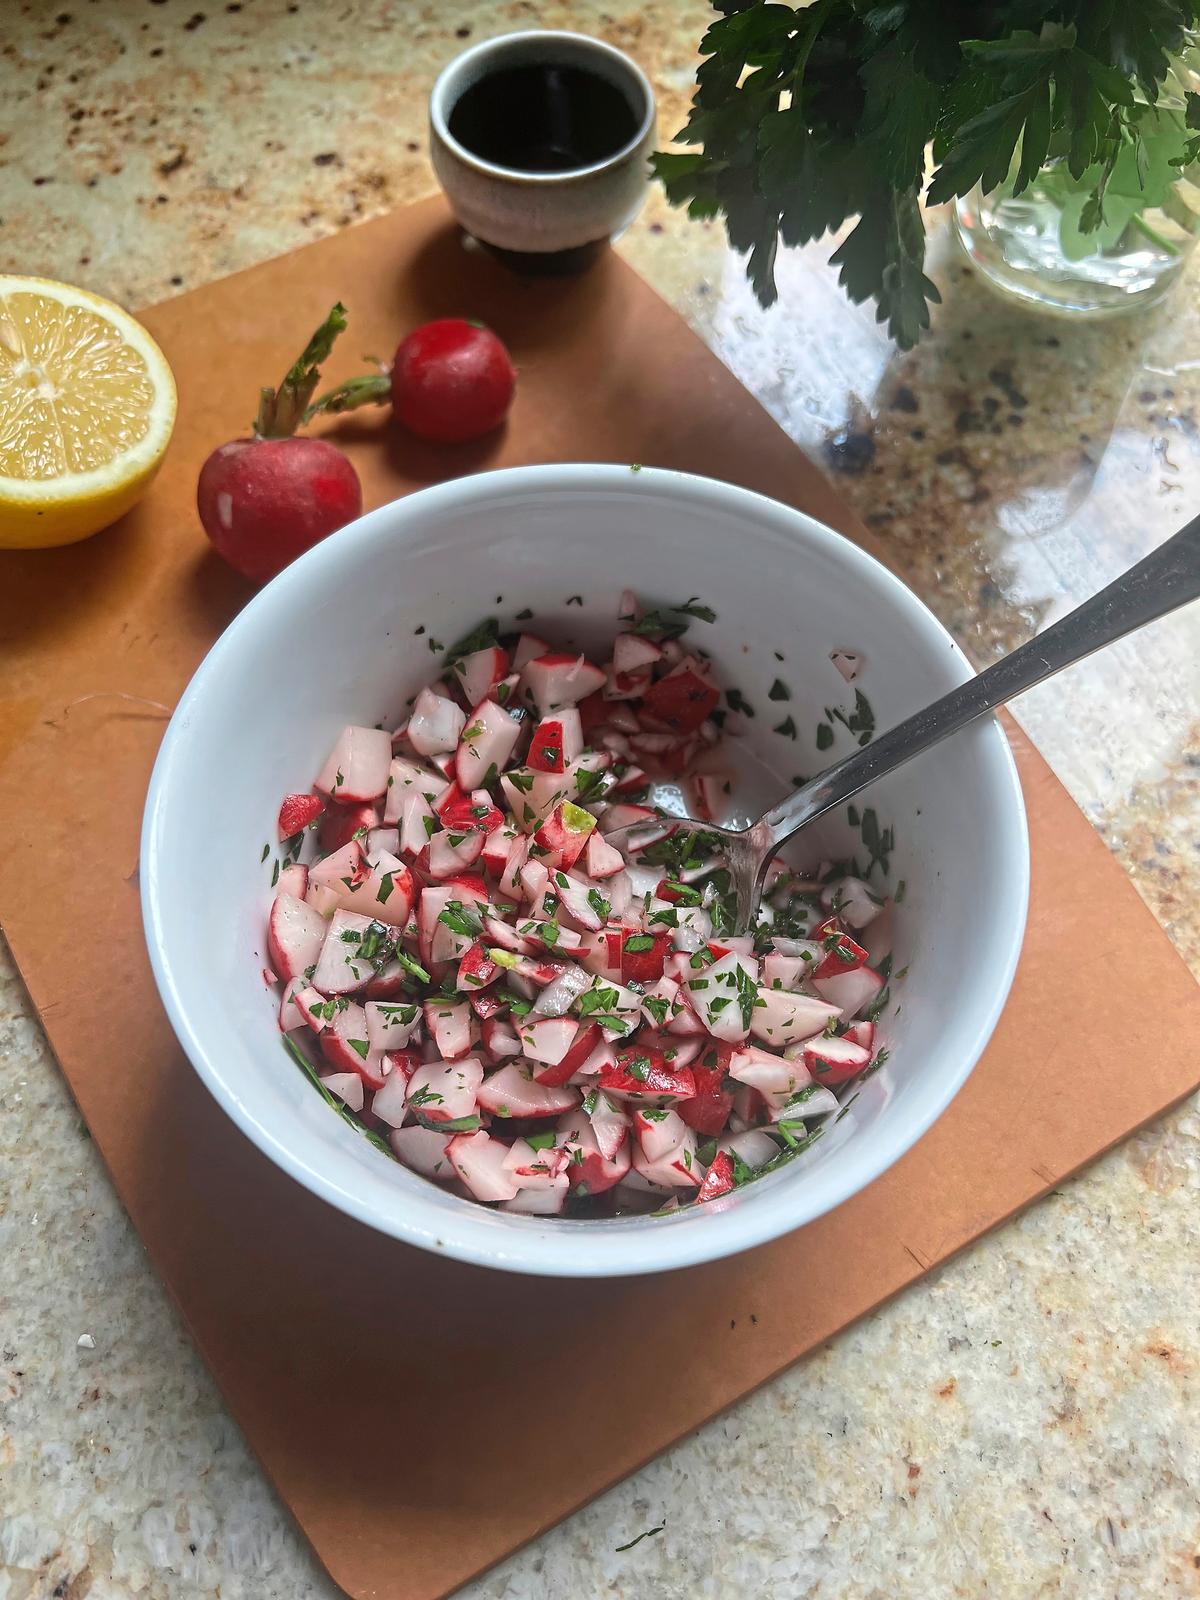 This refreshing spring salad made with radishes, lemon and parsley will add a pop of color to the dinner table. (Gretchen McKay/Pittsburgh Post-Gazette/TNS)